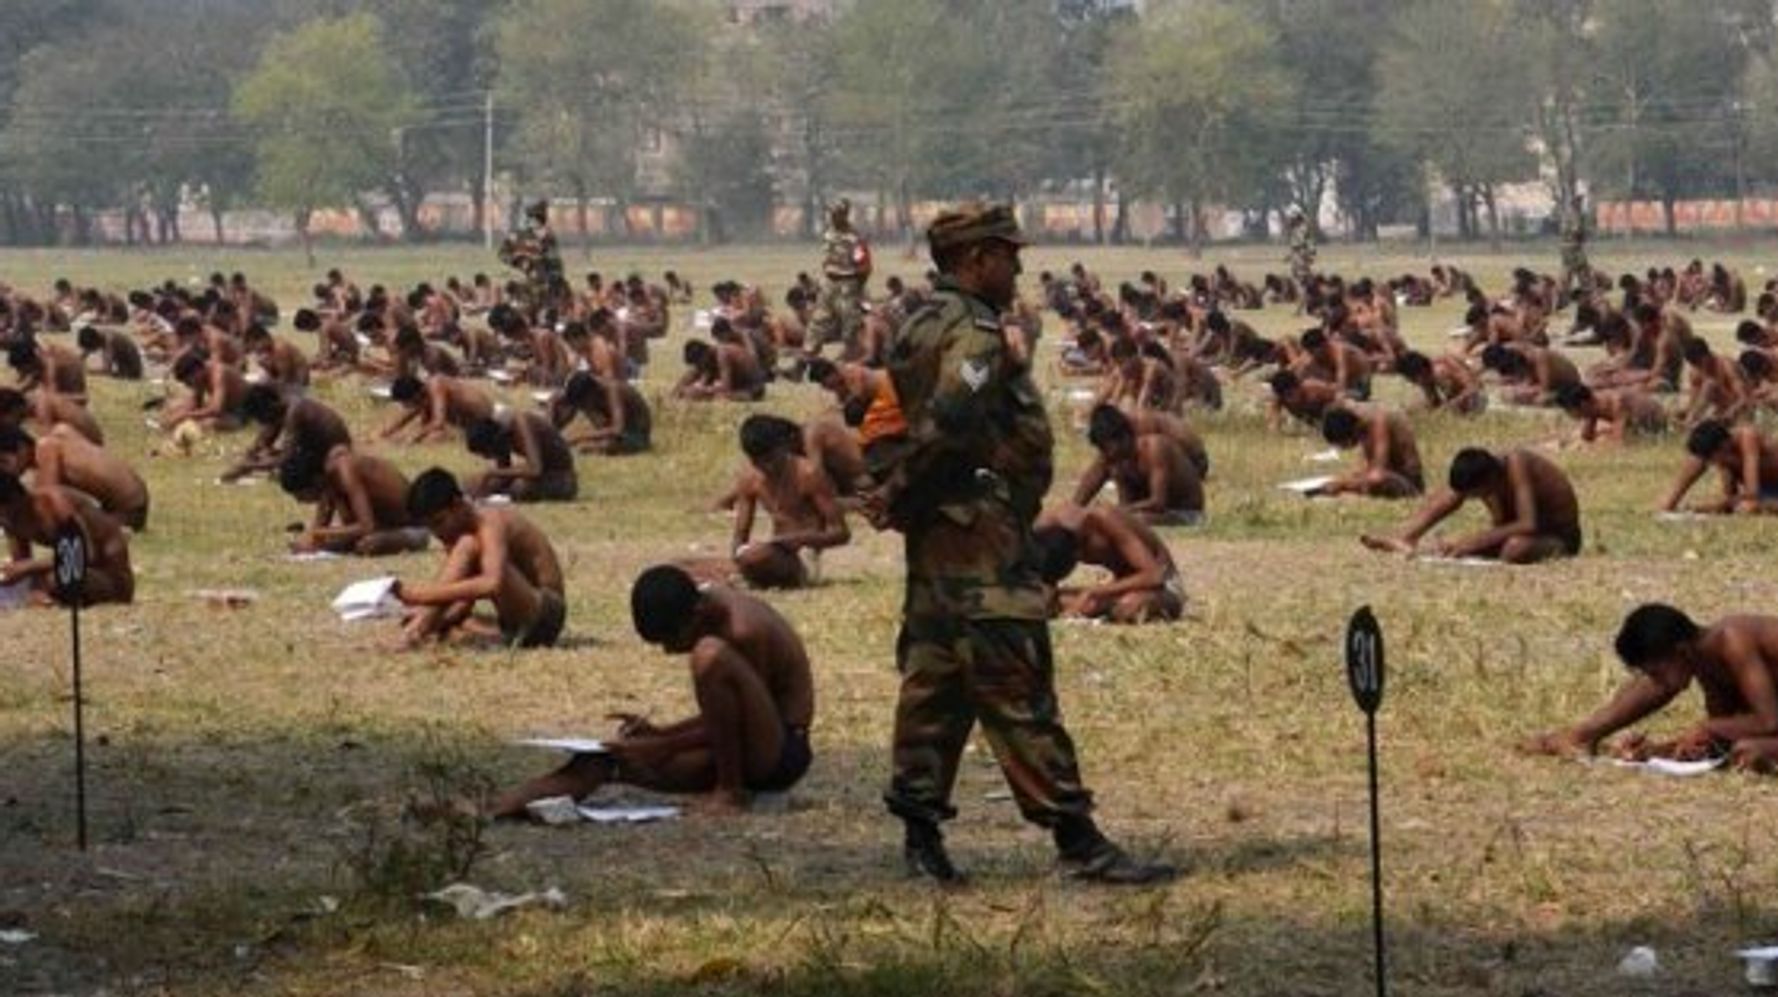 Men Taking An Army Exam Stripped Down To Their Undies To Prevent Cheating